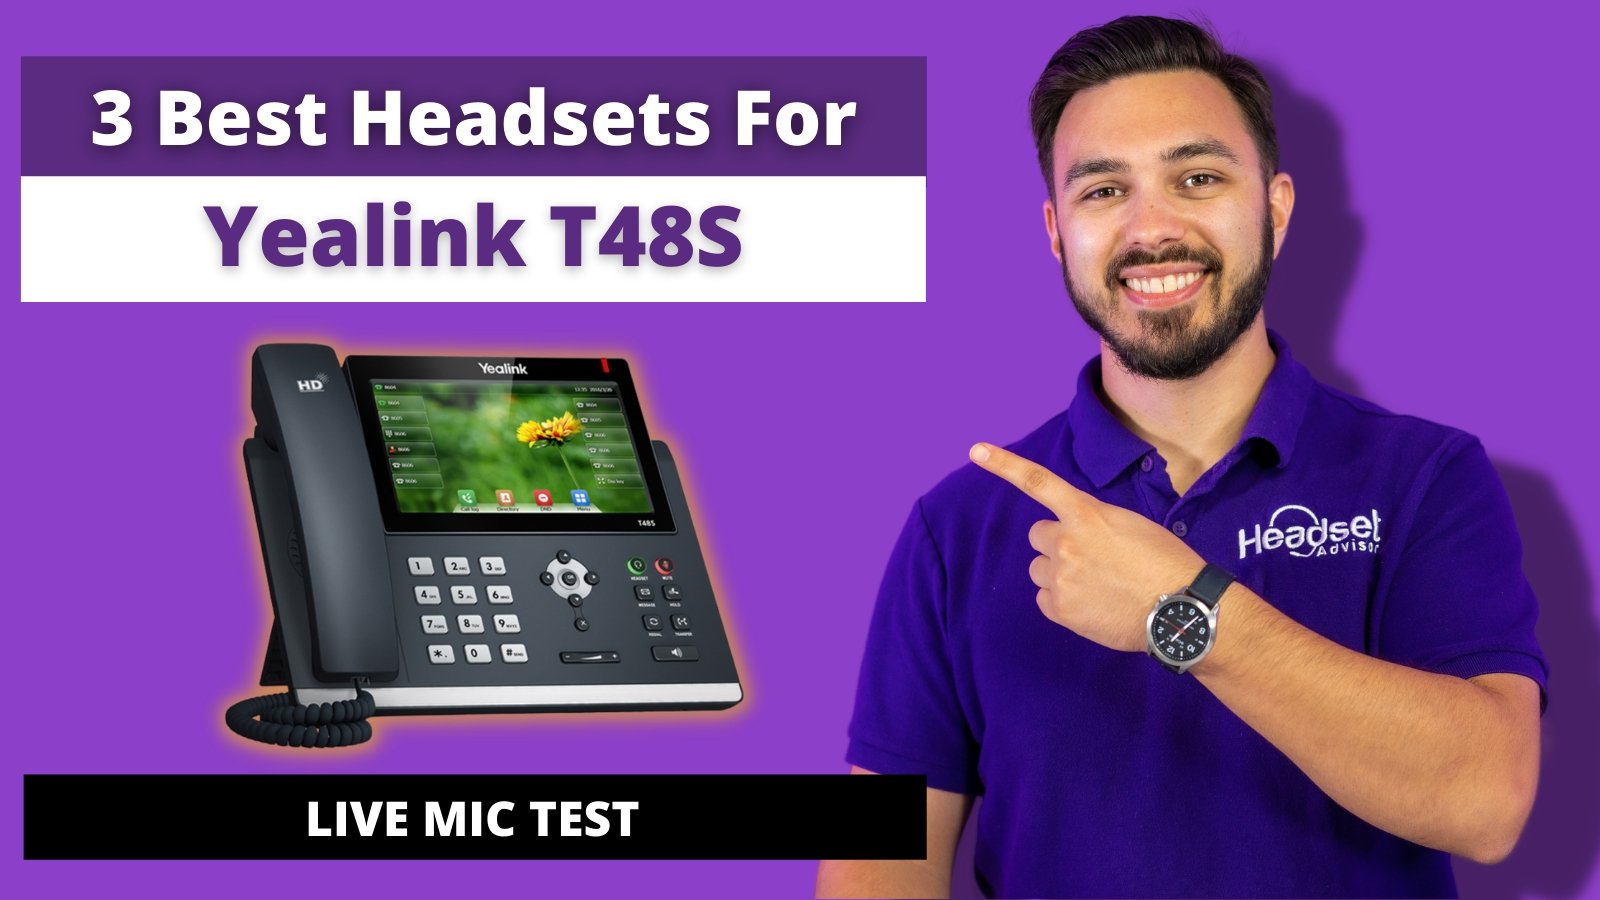 3 Best Headsets for Yealink T48S + Mic Test VIDEO - Headset Advisor